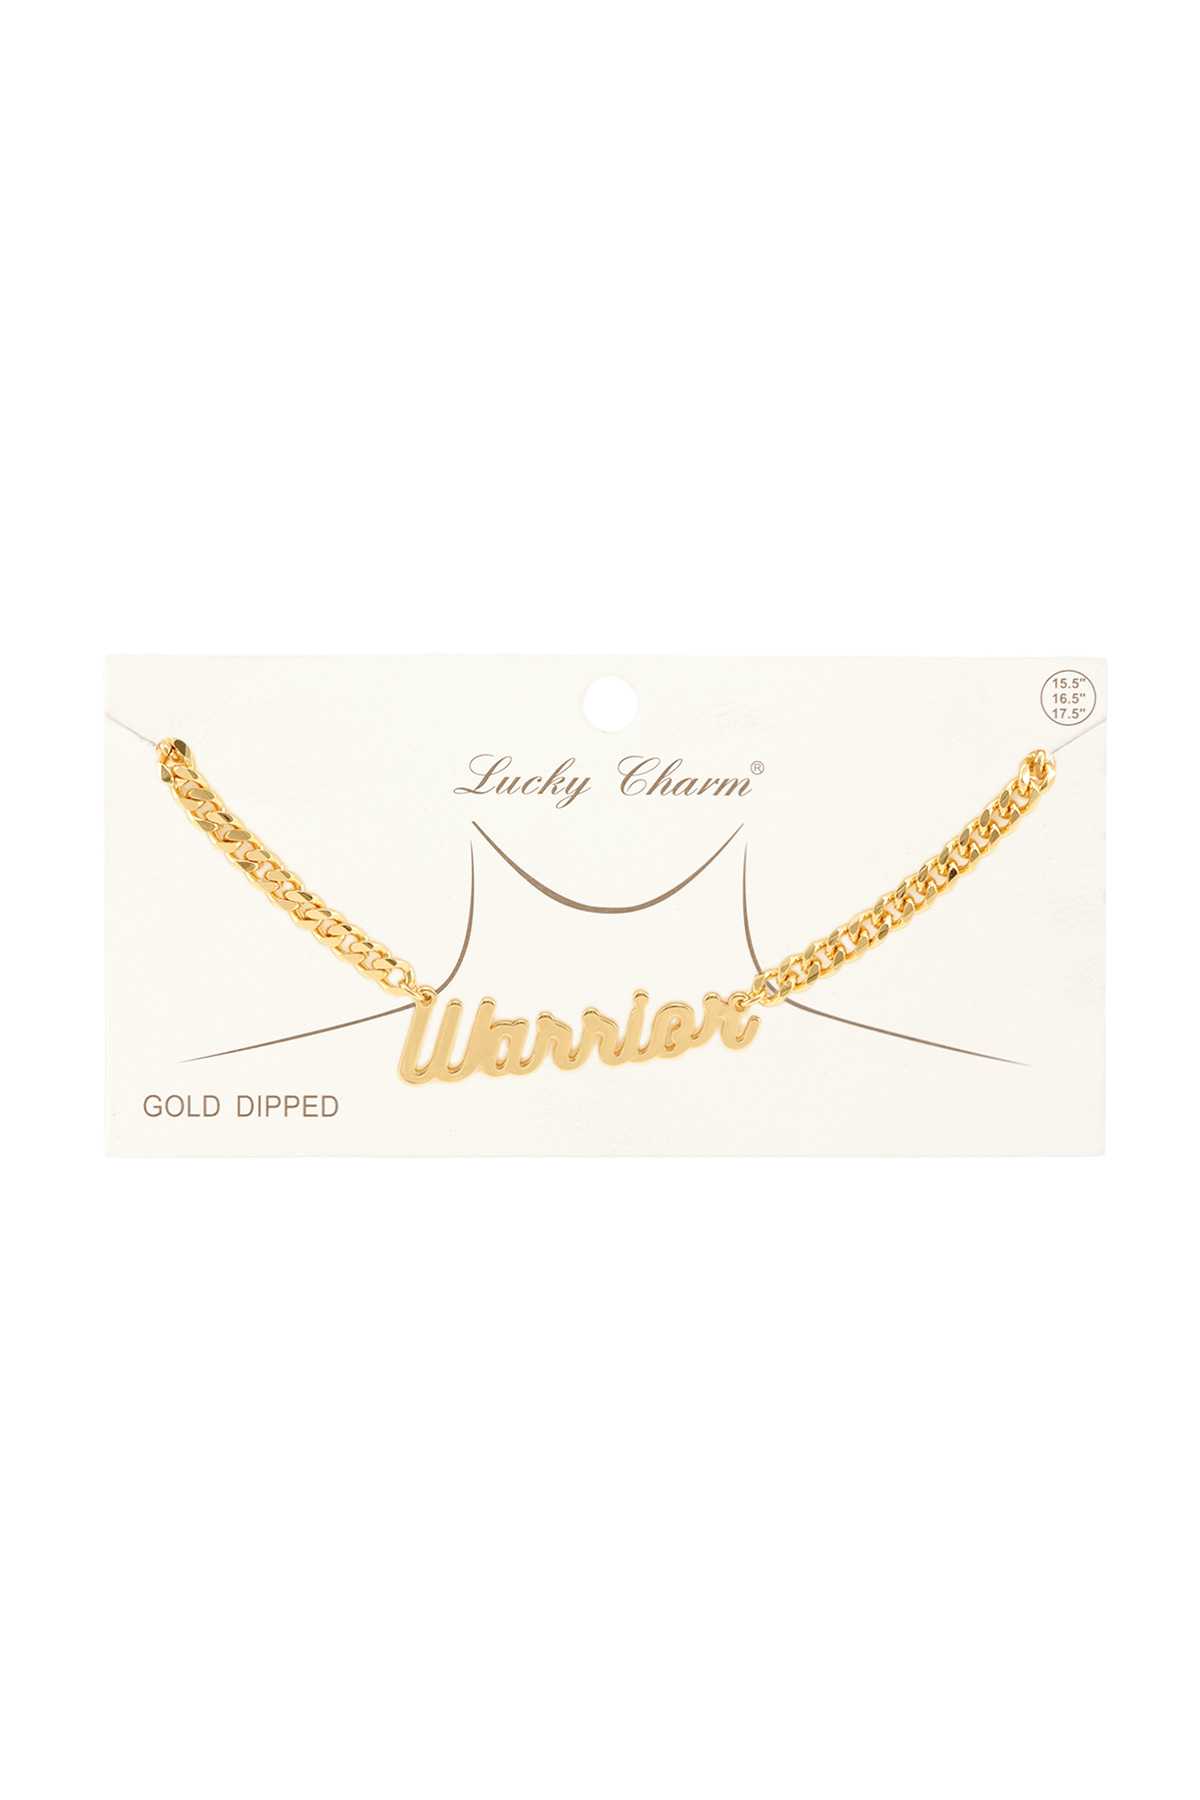 Gold Dipped WARRIOR Necklace